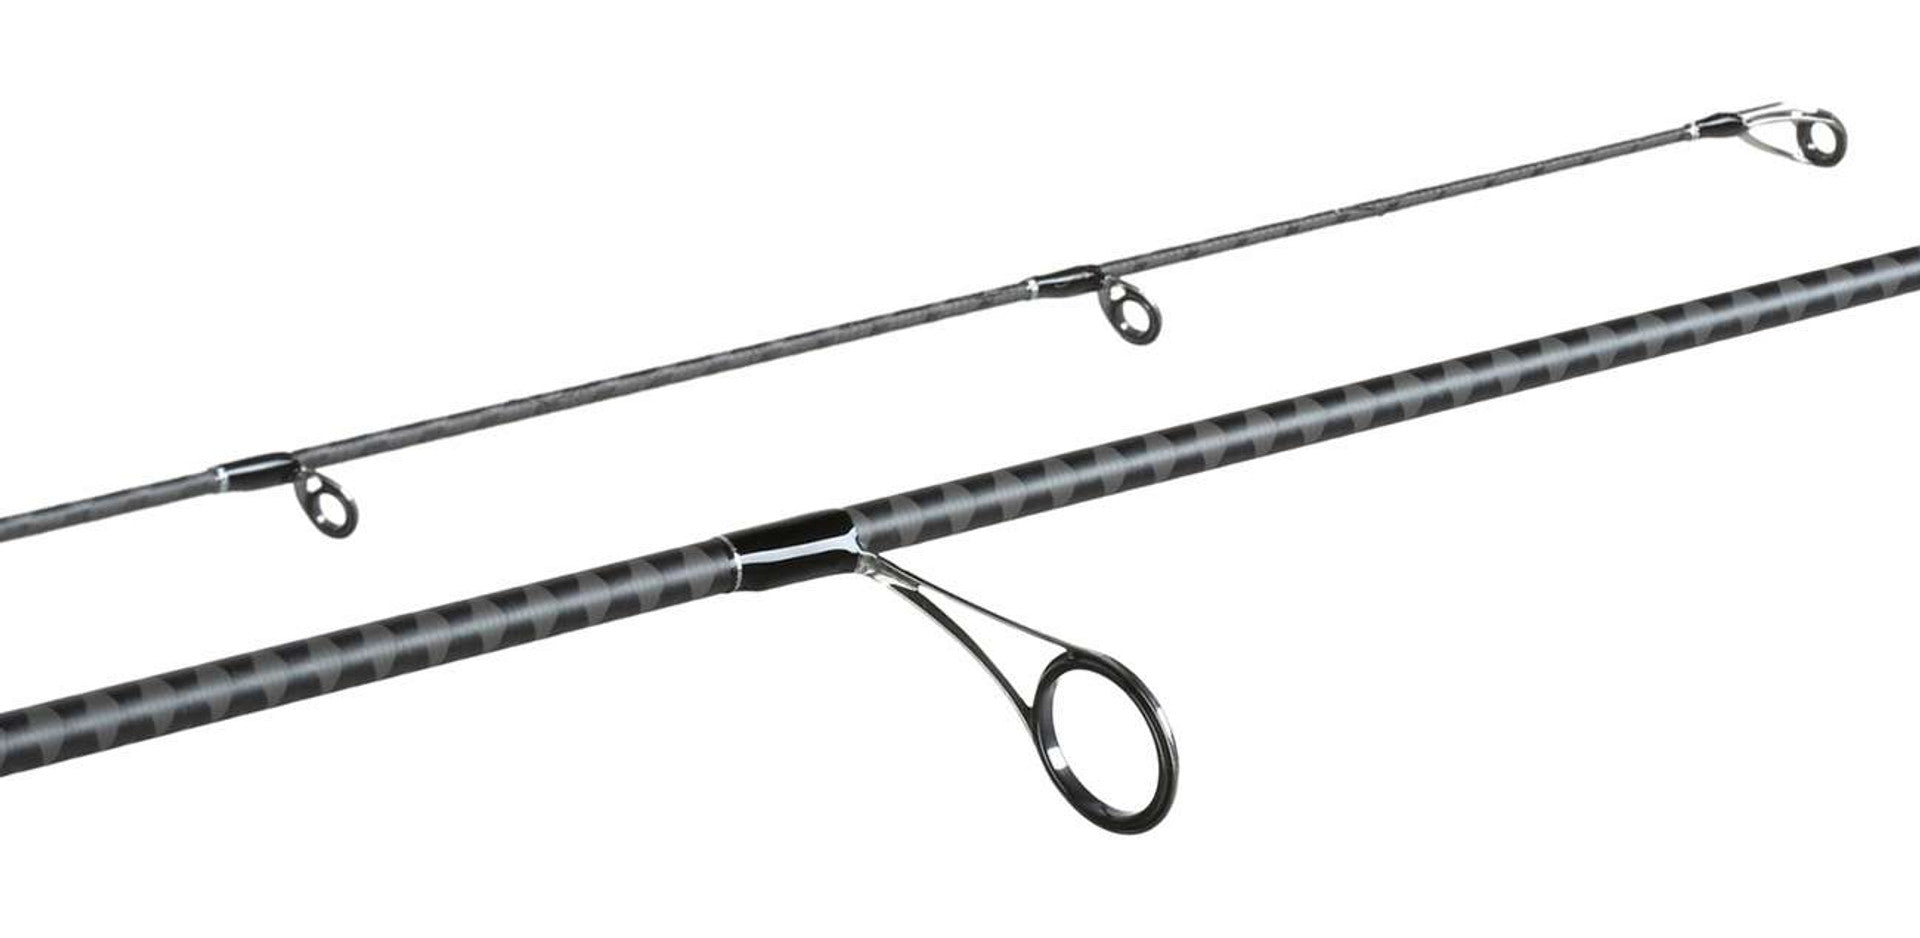 Shimano 7'2 MH Expride B Spinning Rod - Hamilton Bait and Tackle